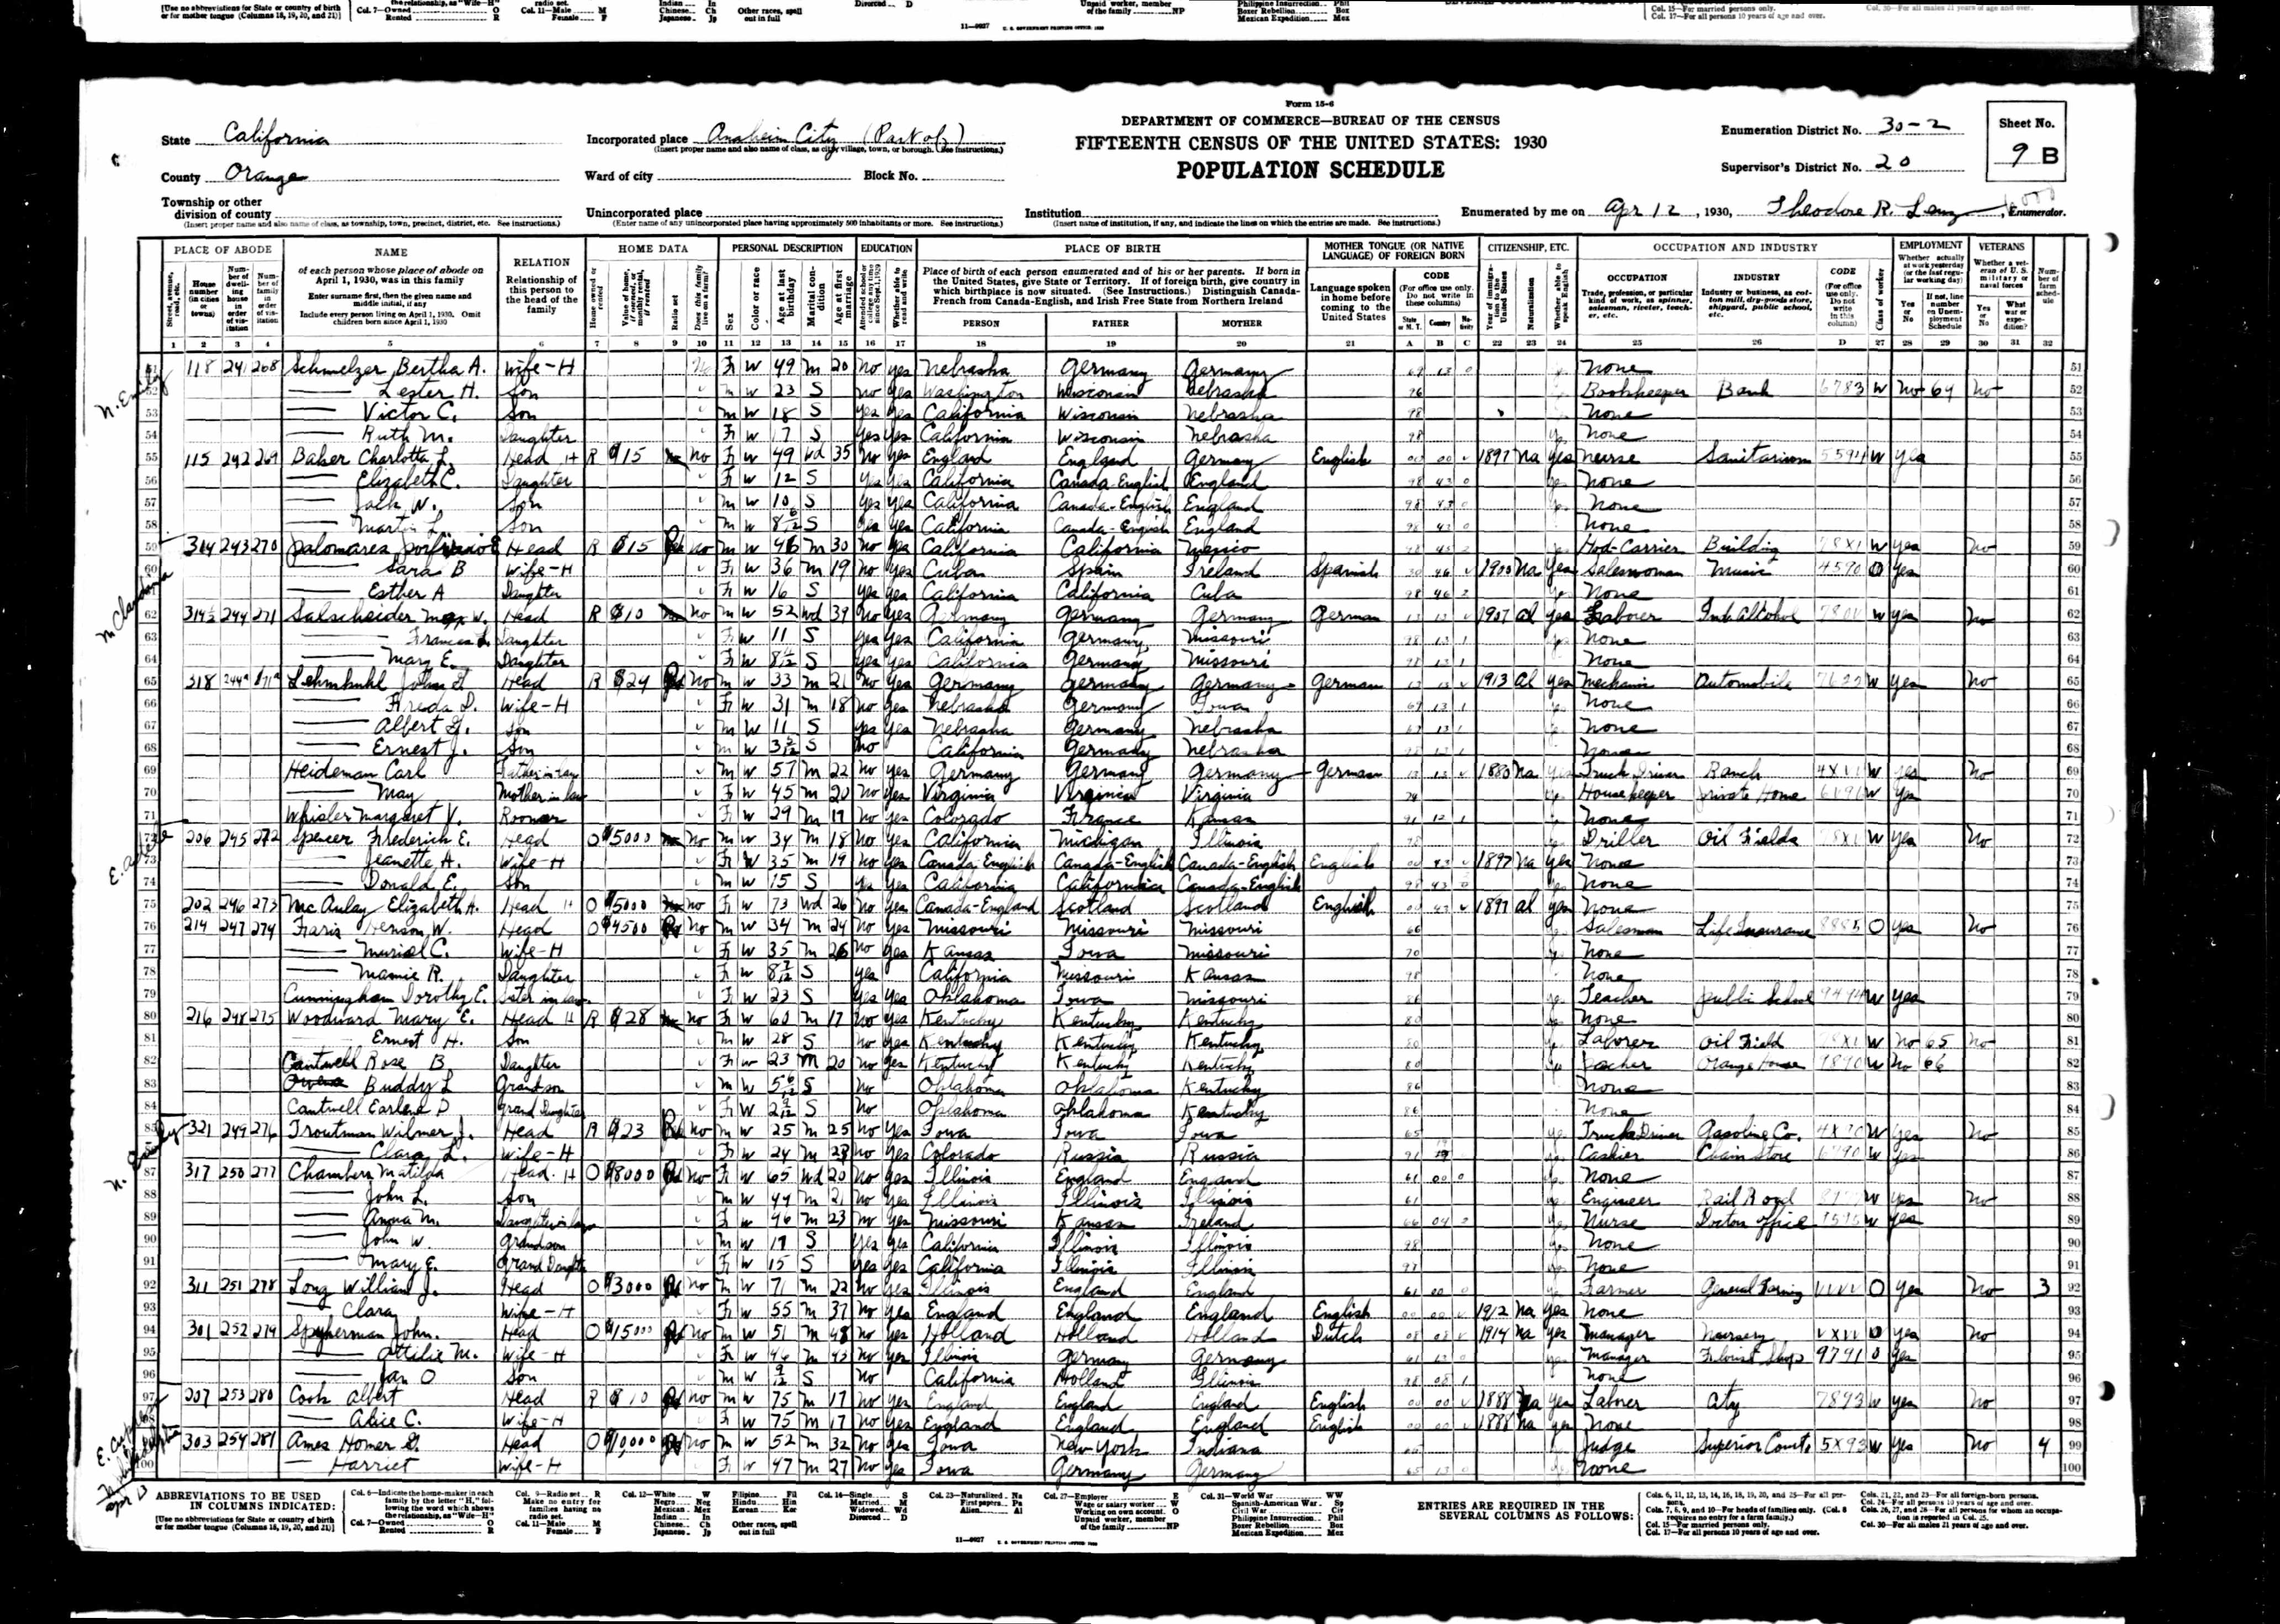 Clara Long in Los Angeles in the 1930 US census